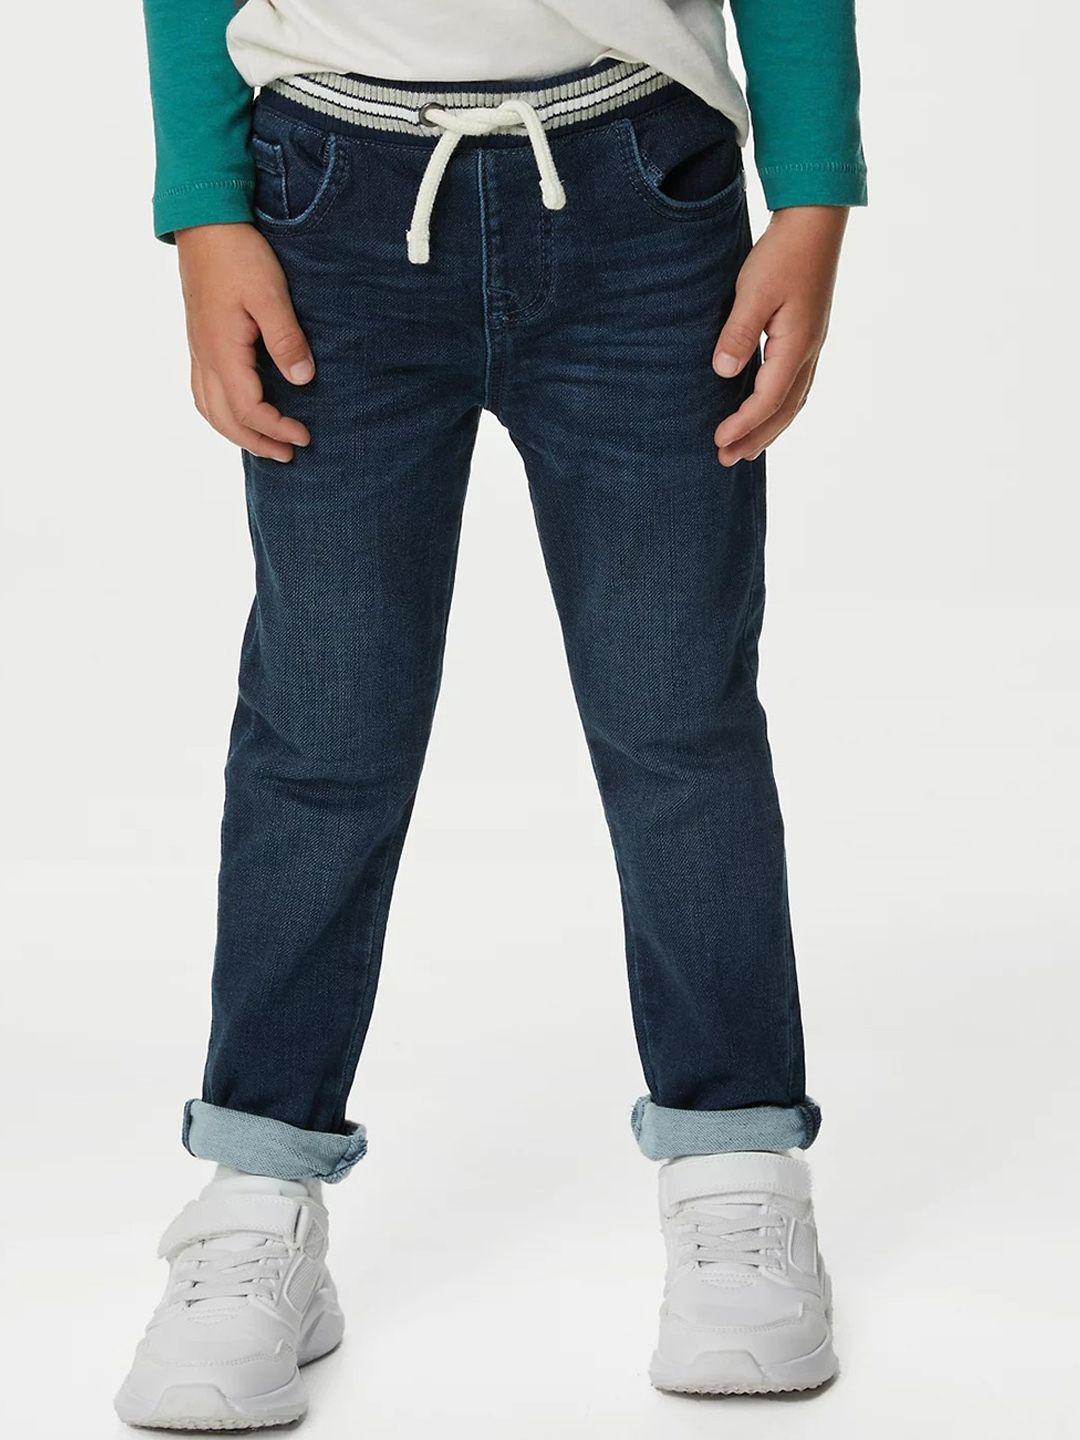 marks-&-spencer-boys-mid-rise-clean-look-light-fade-stretchable-jeans